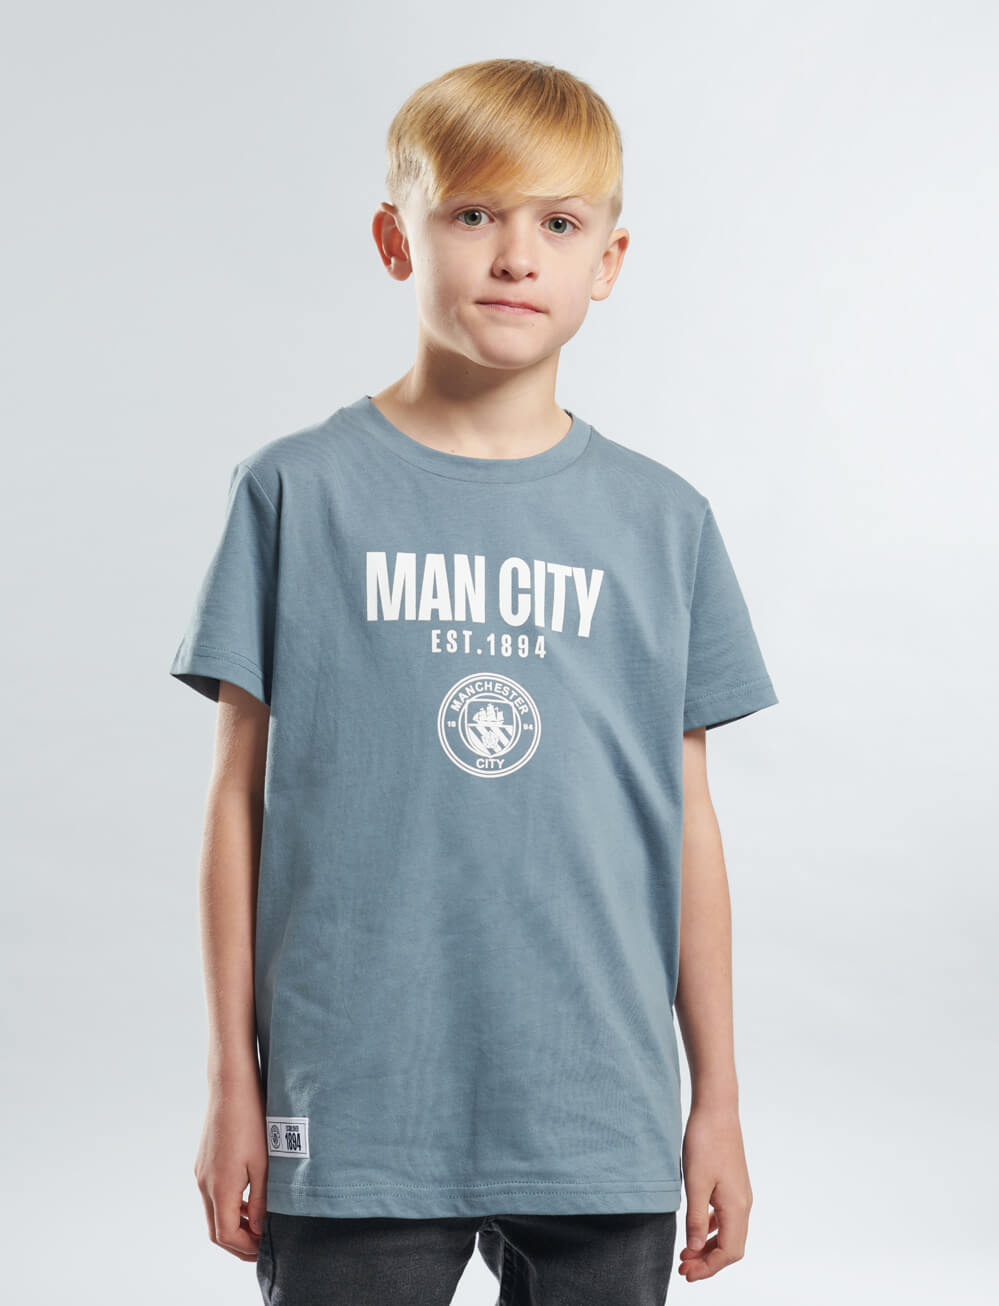 Official Manchester City Kids Graphic T-Shirt - Grey - The World Football Store